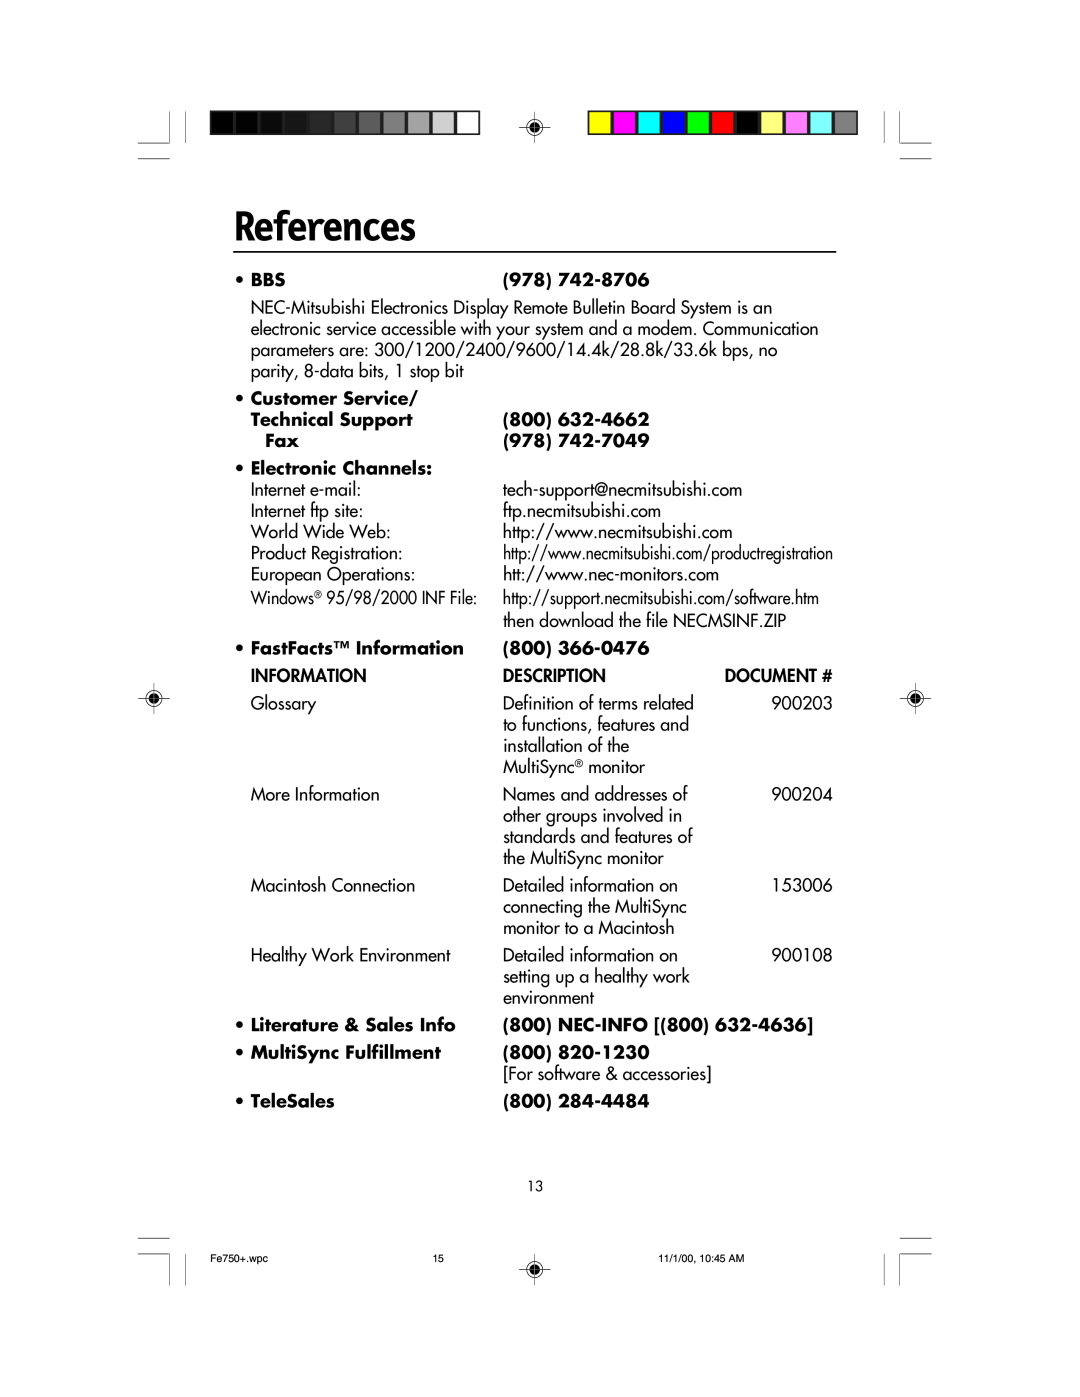 NEC FE750 Plus user manual References, Document # 